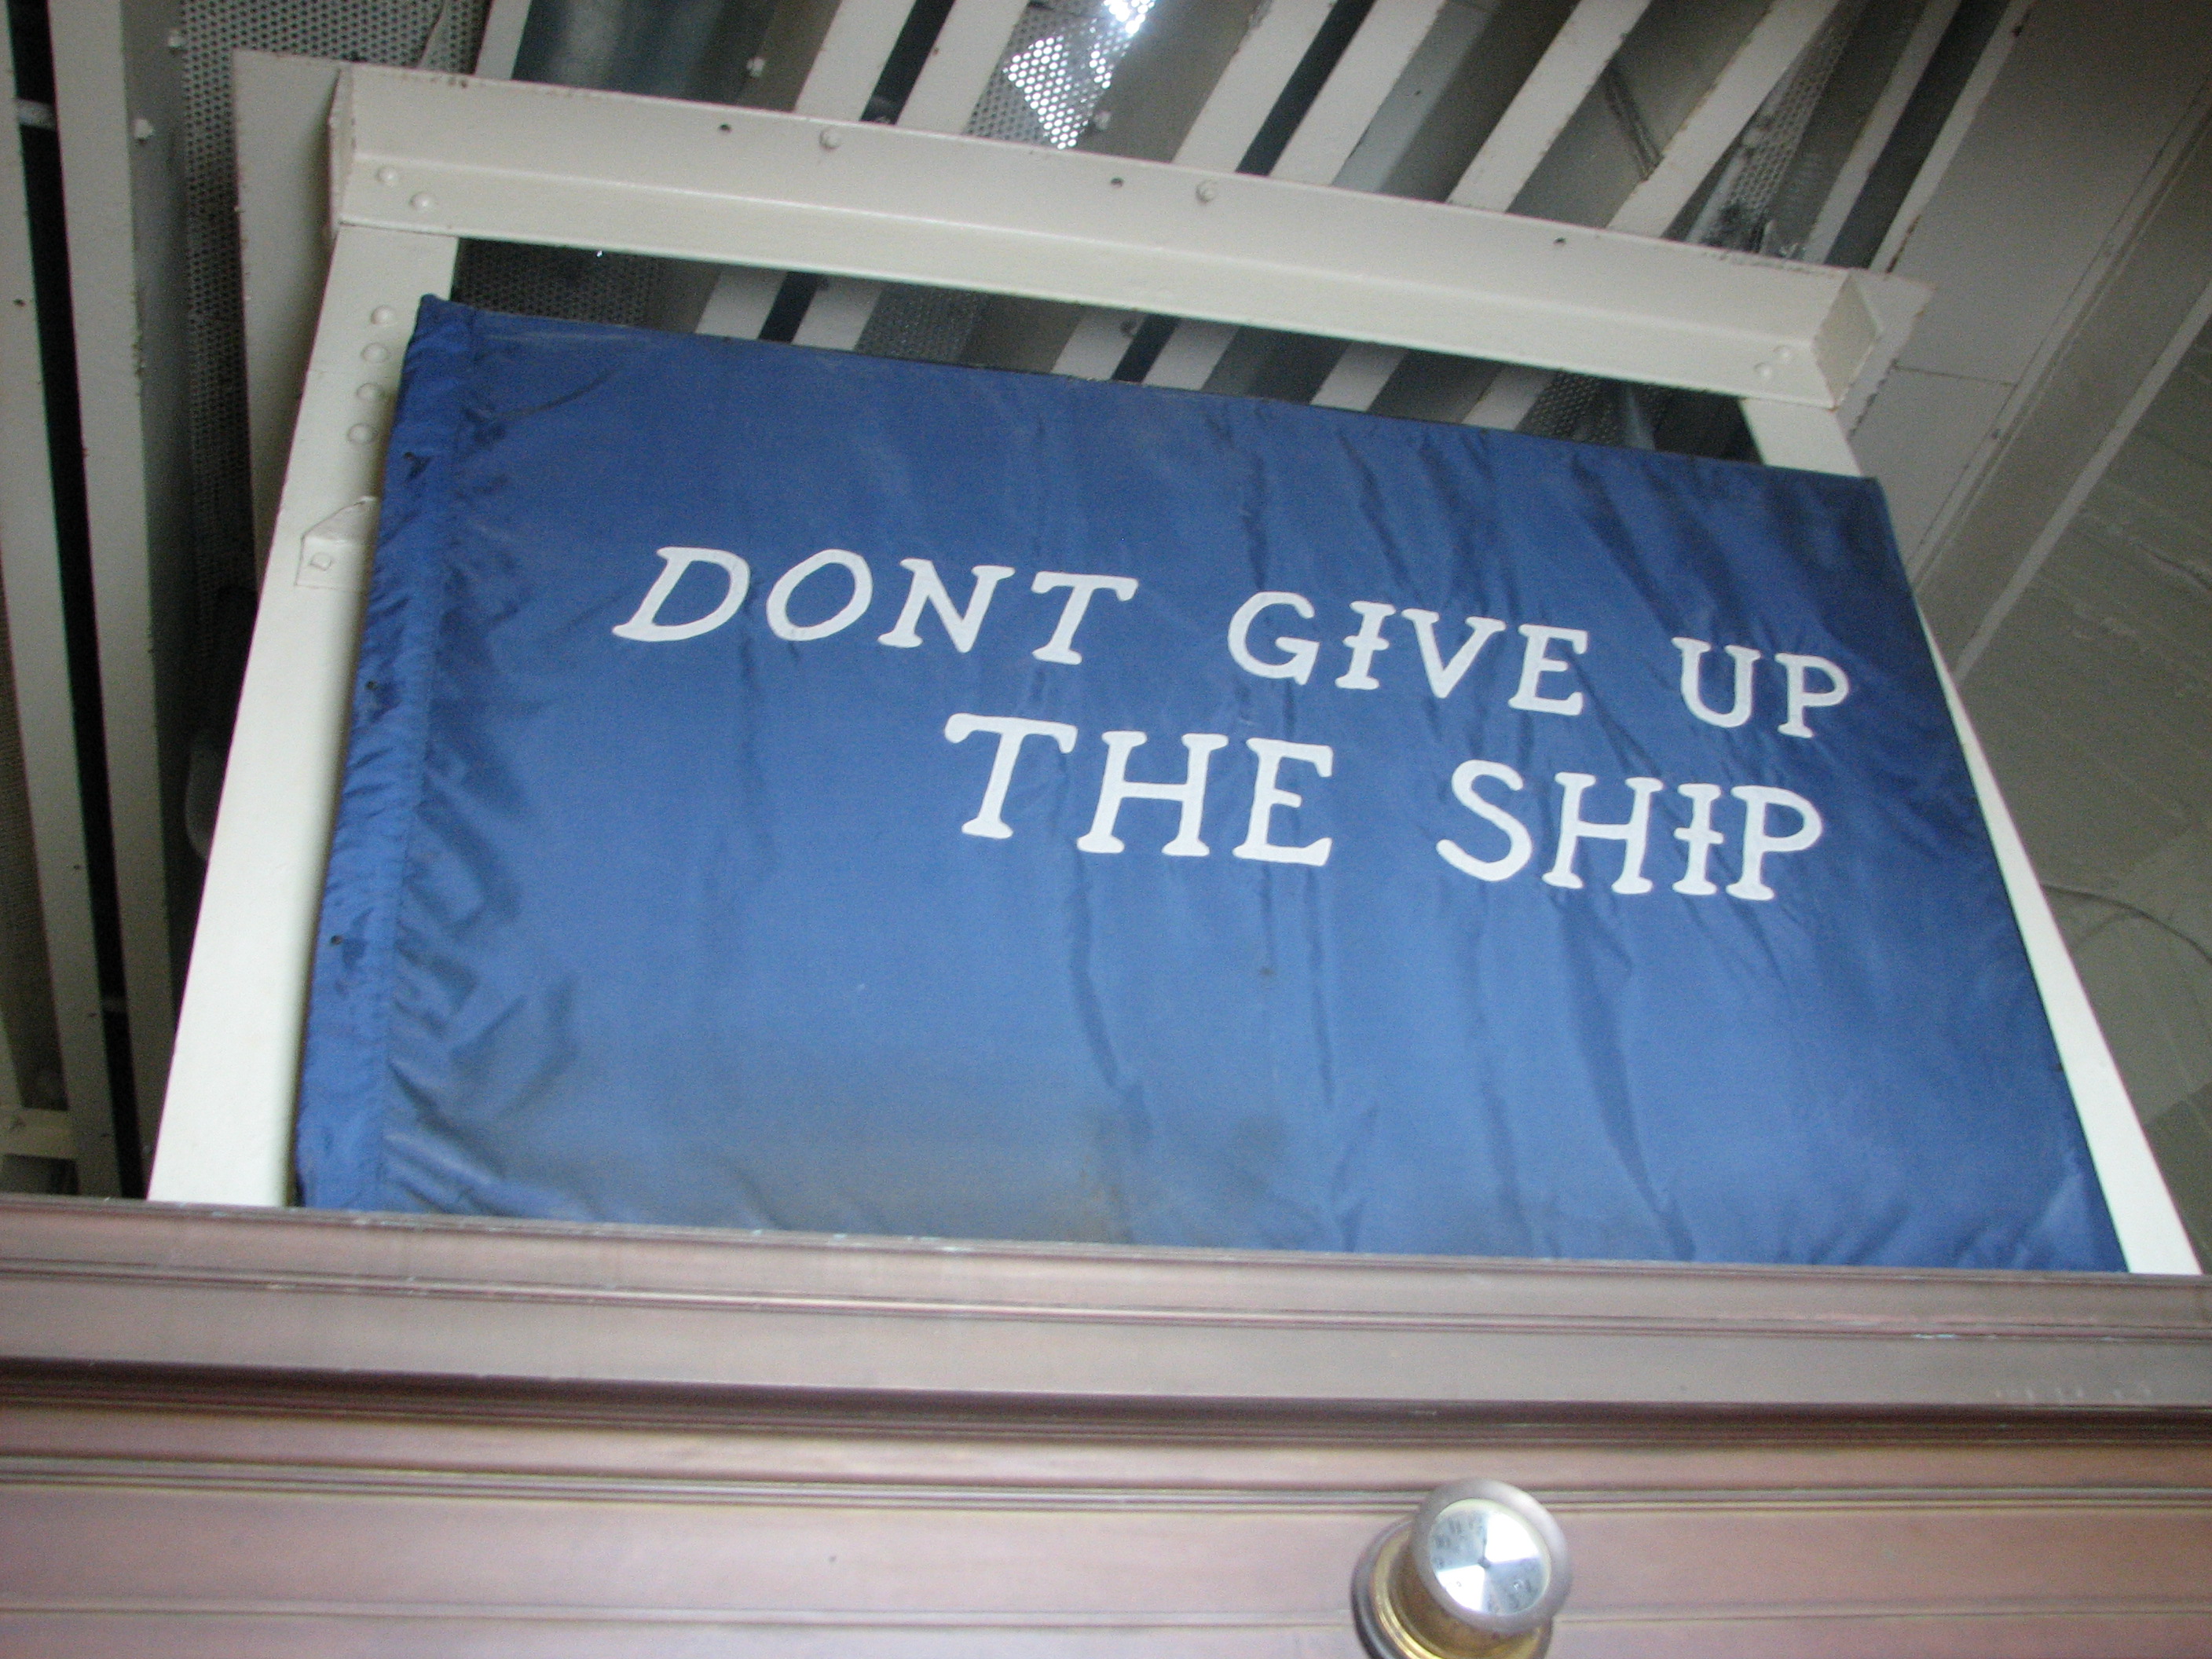 Dont file. Don't give up the ship. Dont give up a ship флаг. Never give up the ship. Font don't give up the ship.